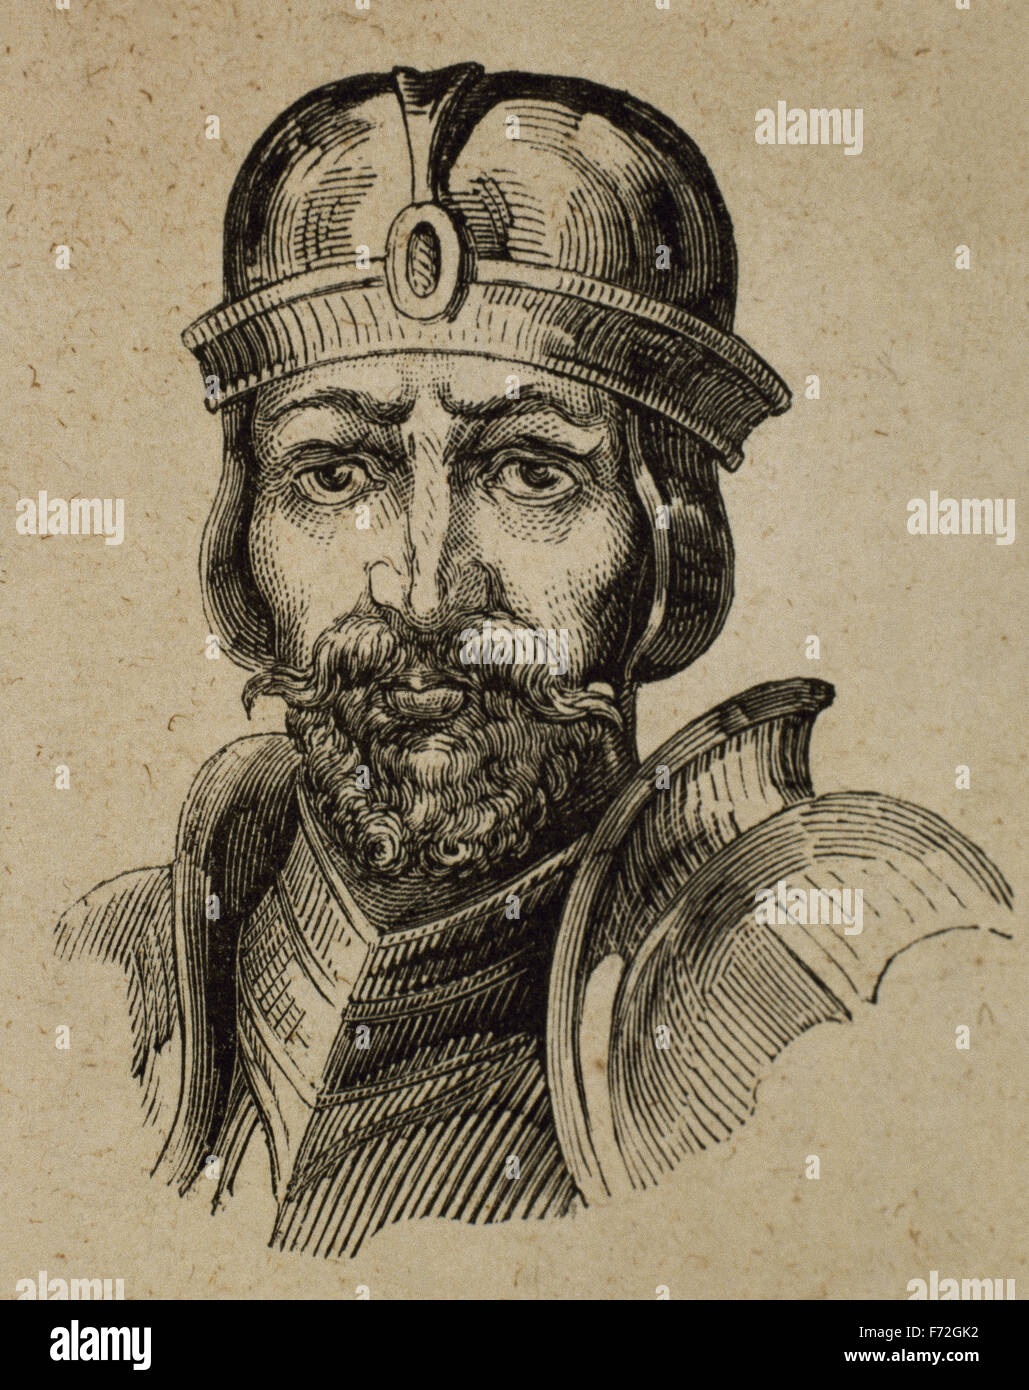 Roderic (died 711 or 712). Visigothic King of Hispania for a brief period between 710-712. Portrait. Engraving. Stock Photo